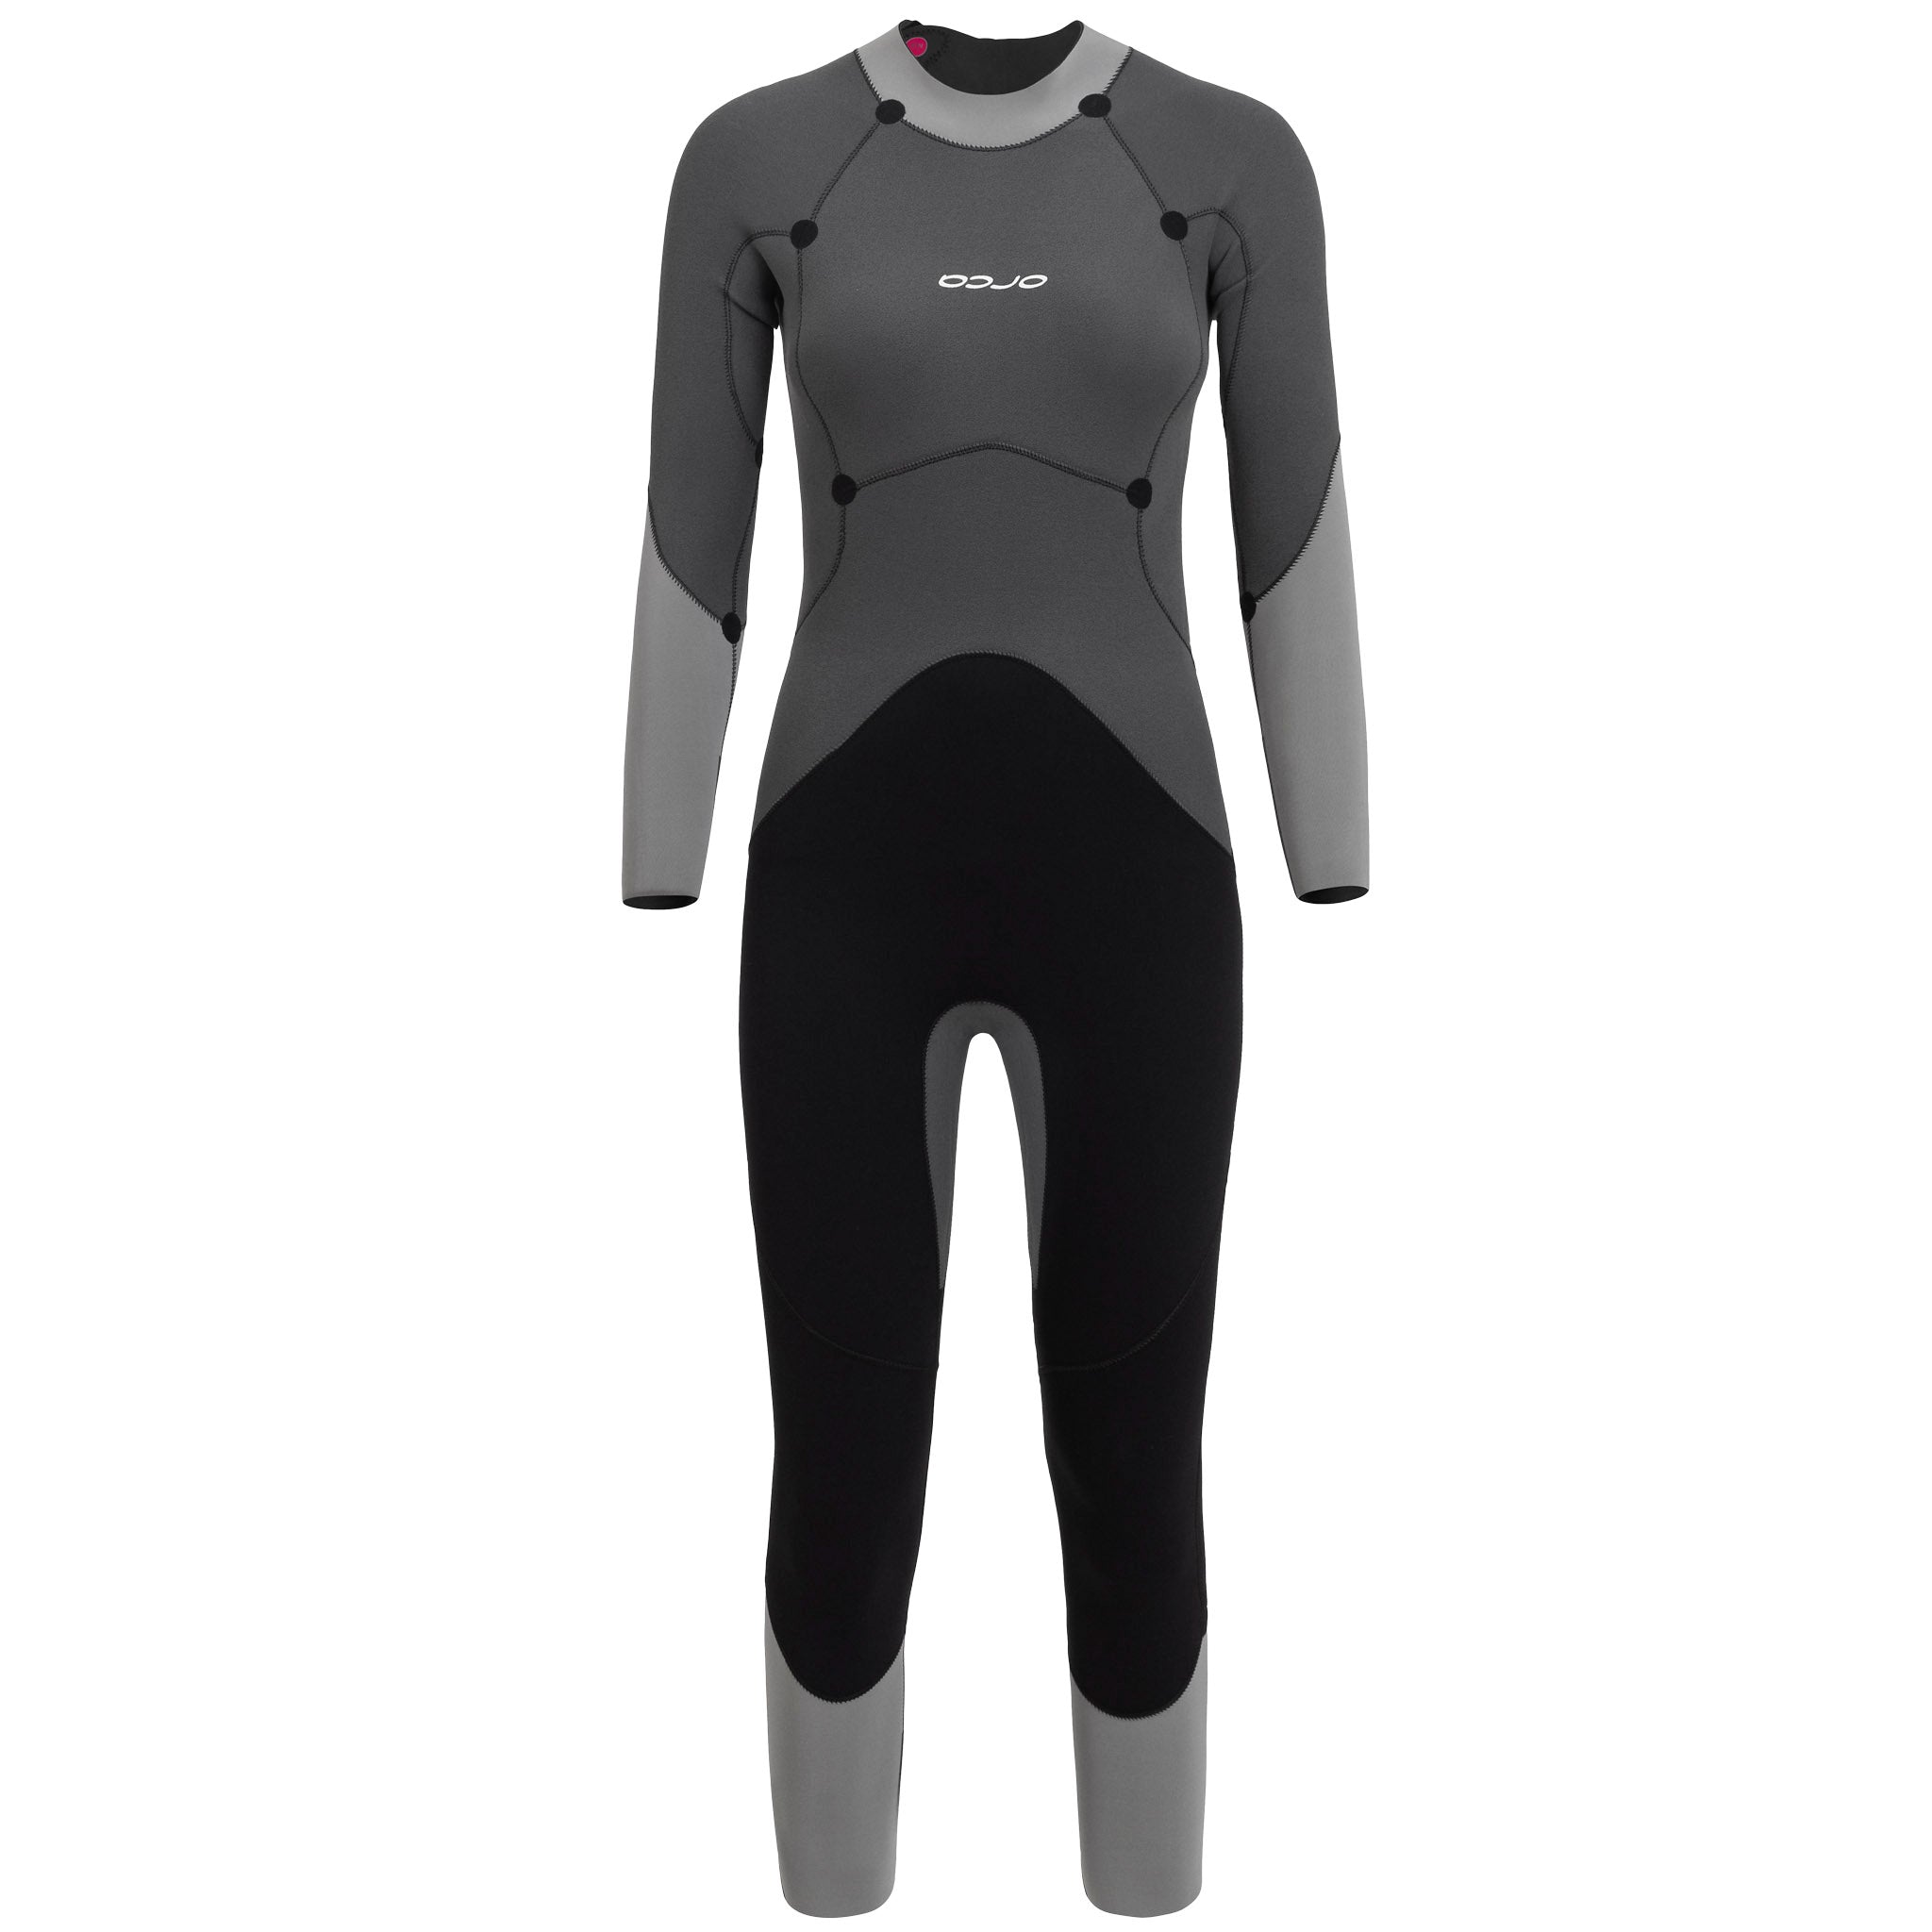 Orca Women's Athlex FLEX Swimming Wetsuit | View inside panel layout